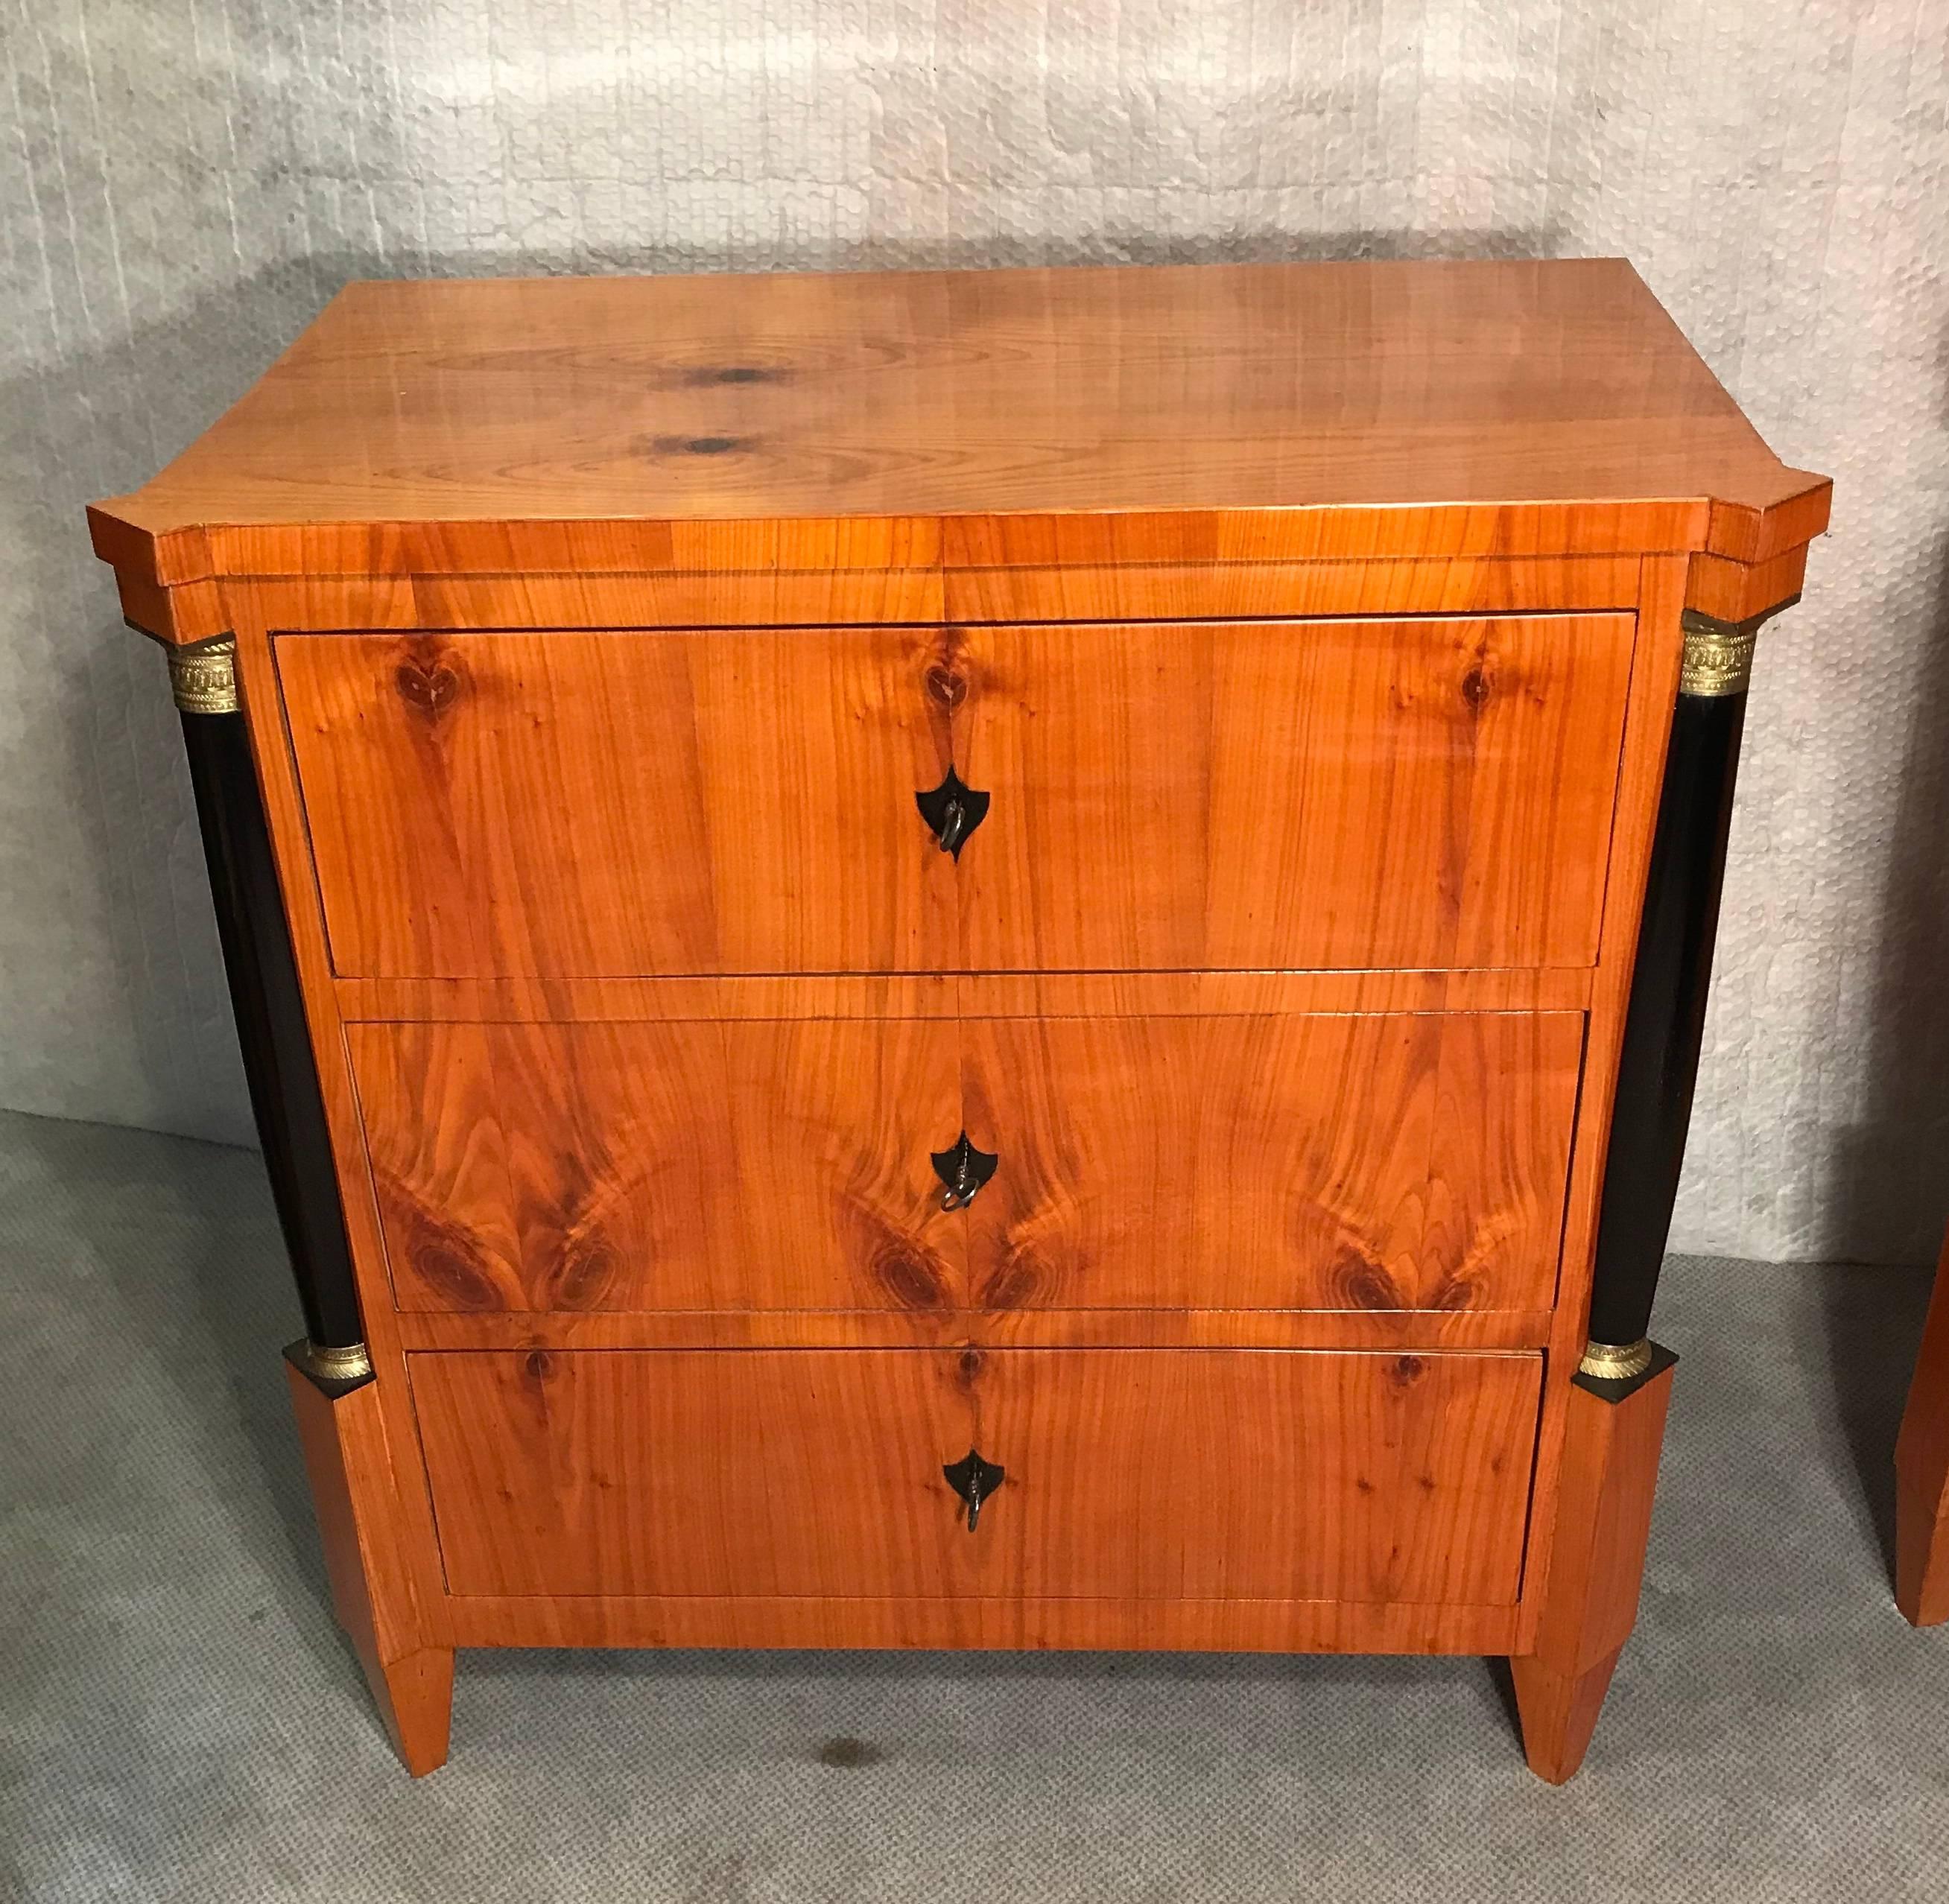 Beautiful pair of Biedermeier commodes, Germany 19th century cherrywood veneer with ebonized columns and brass capitals and bases. In very good condition, refinsihed and French polished. The commodes can also be sold separately. Price per item $6000.